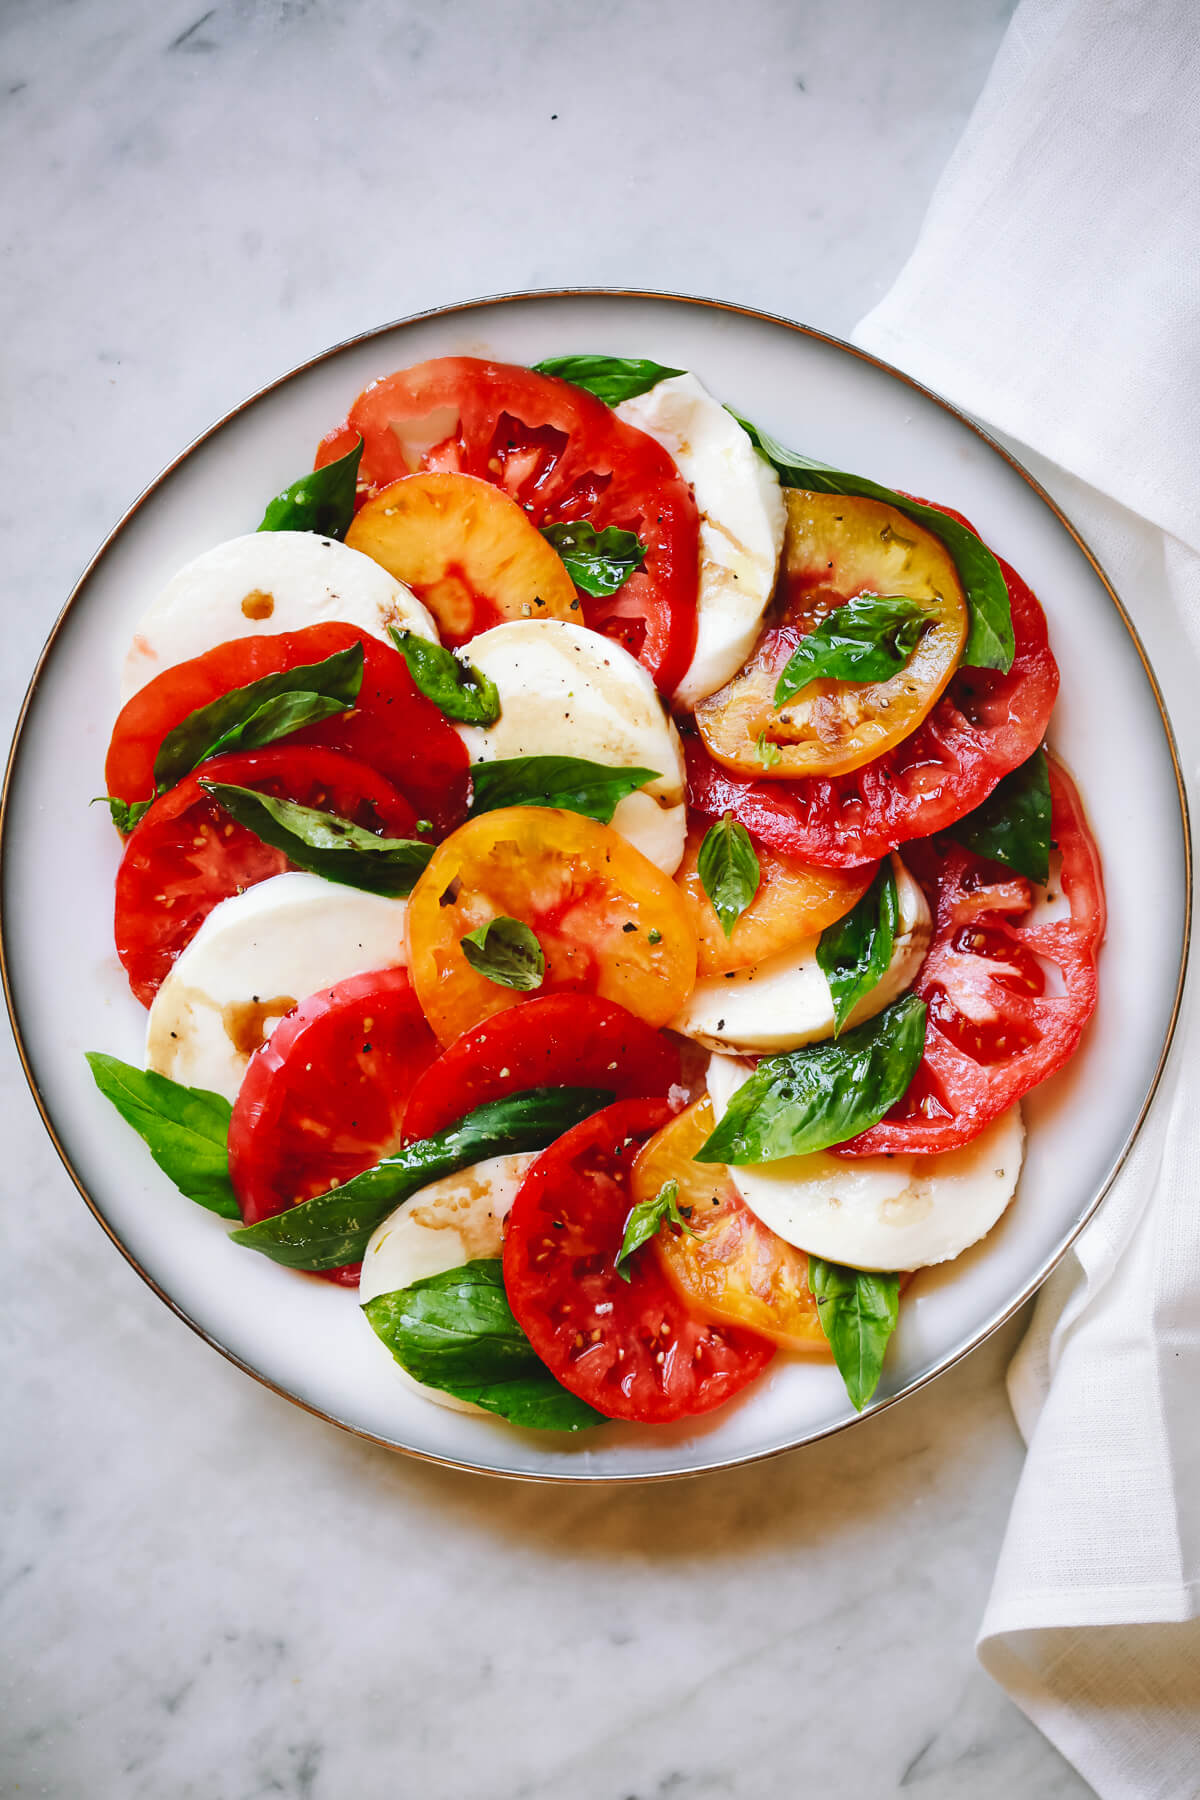 A plate of Caprese salad made with fresh tomatoes, mozzarella, and basil.